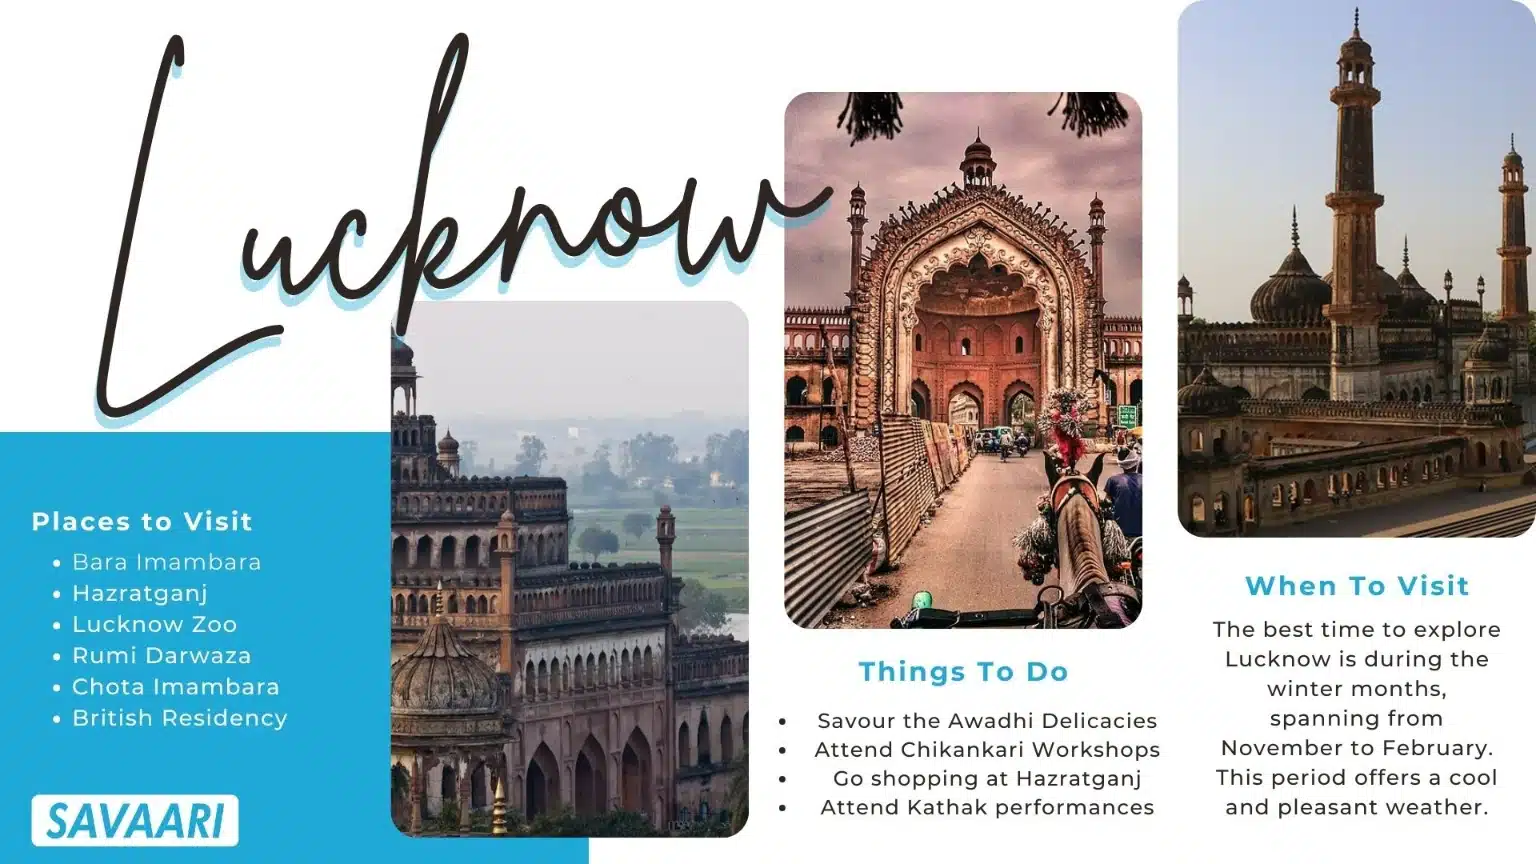 Things to do in Lucknow